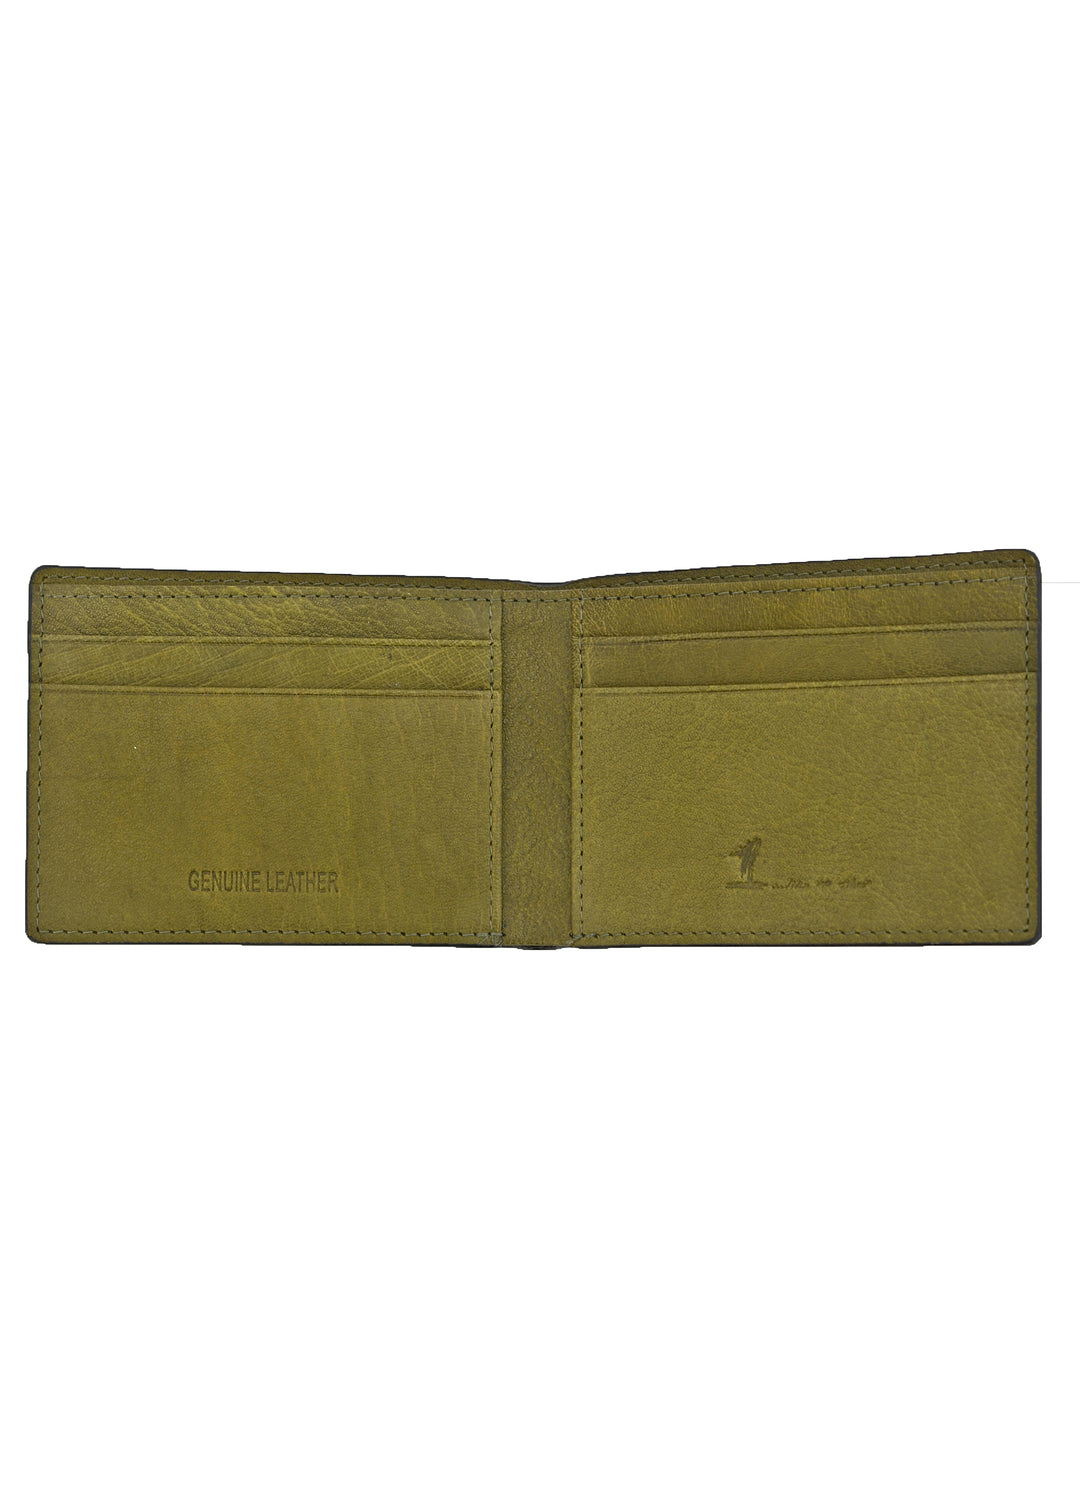 1 Like No Other Genuine Leather Wallet